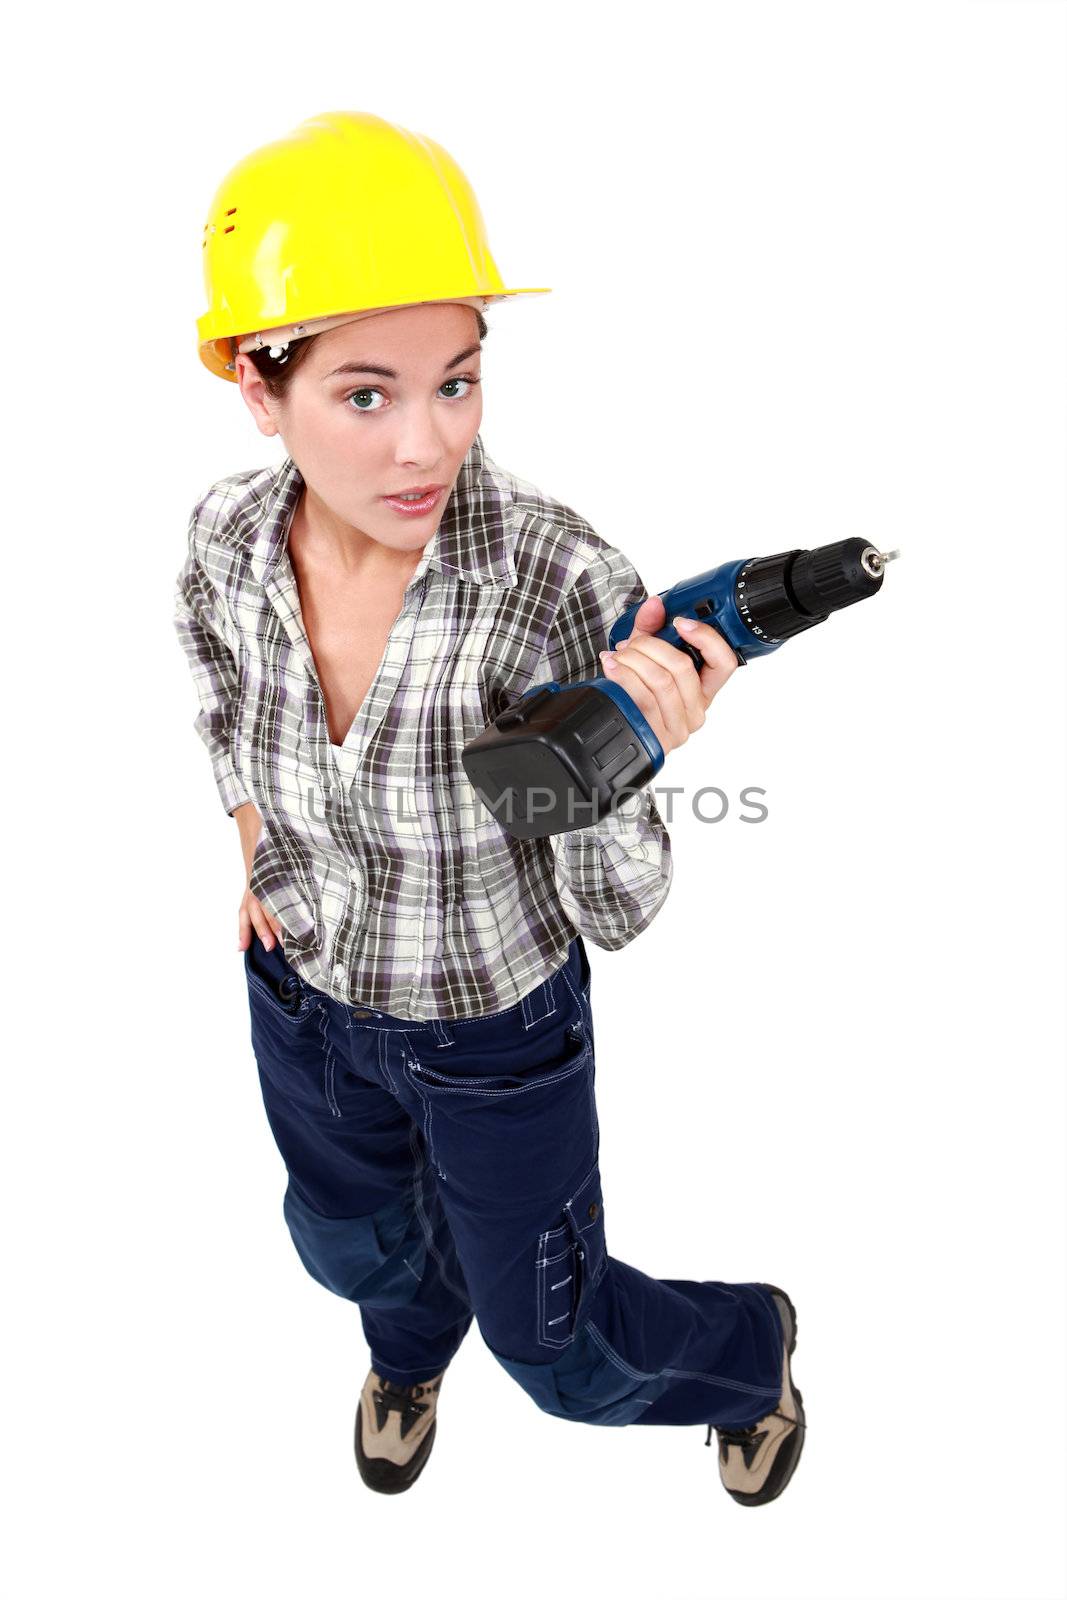 Tradeswoman holding a battery-powered power tool by phovoir